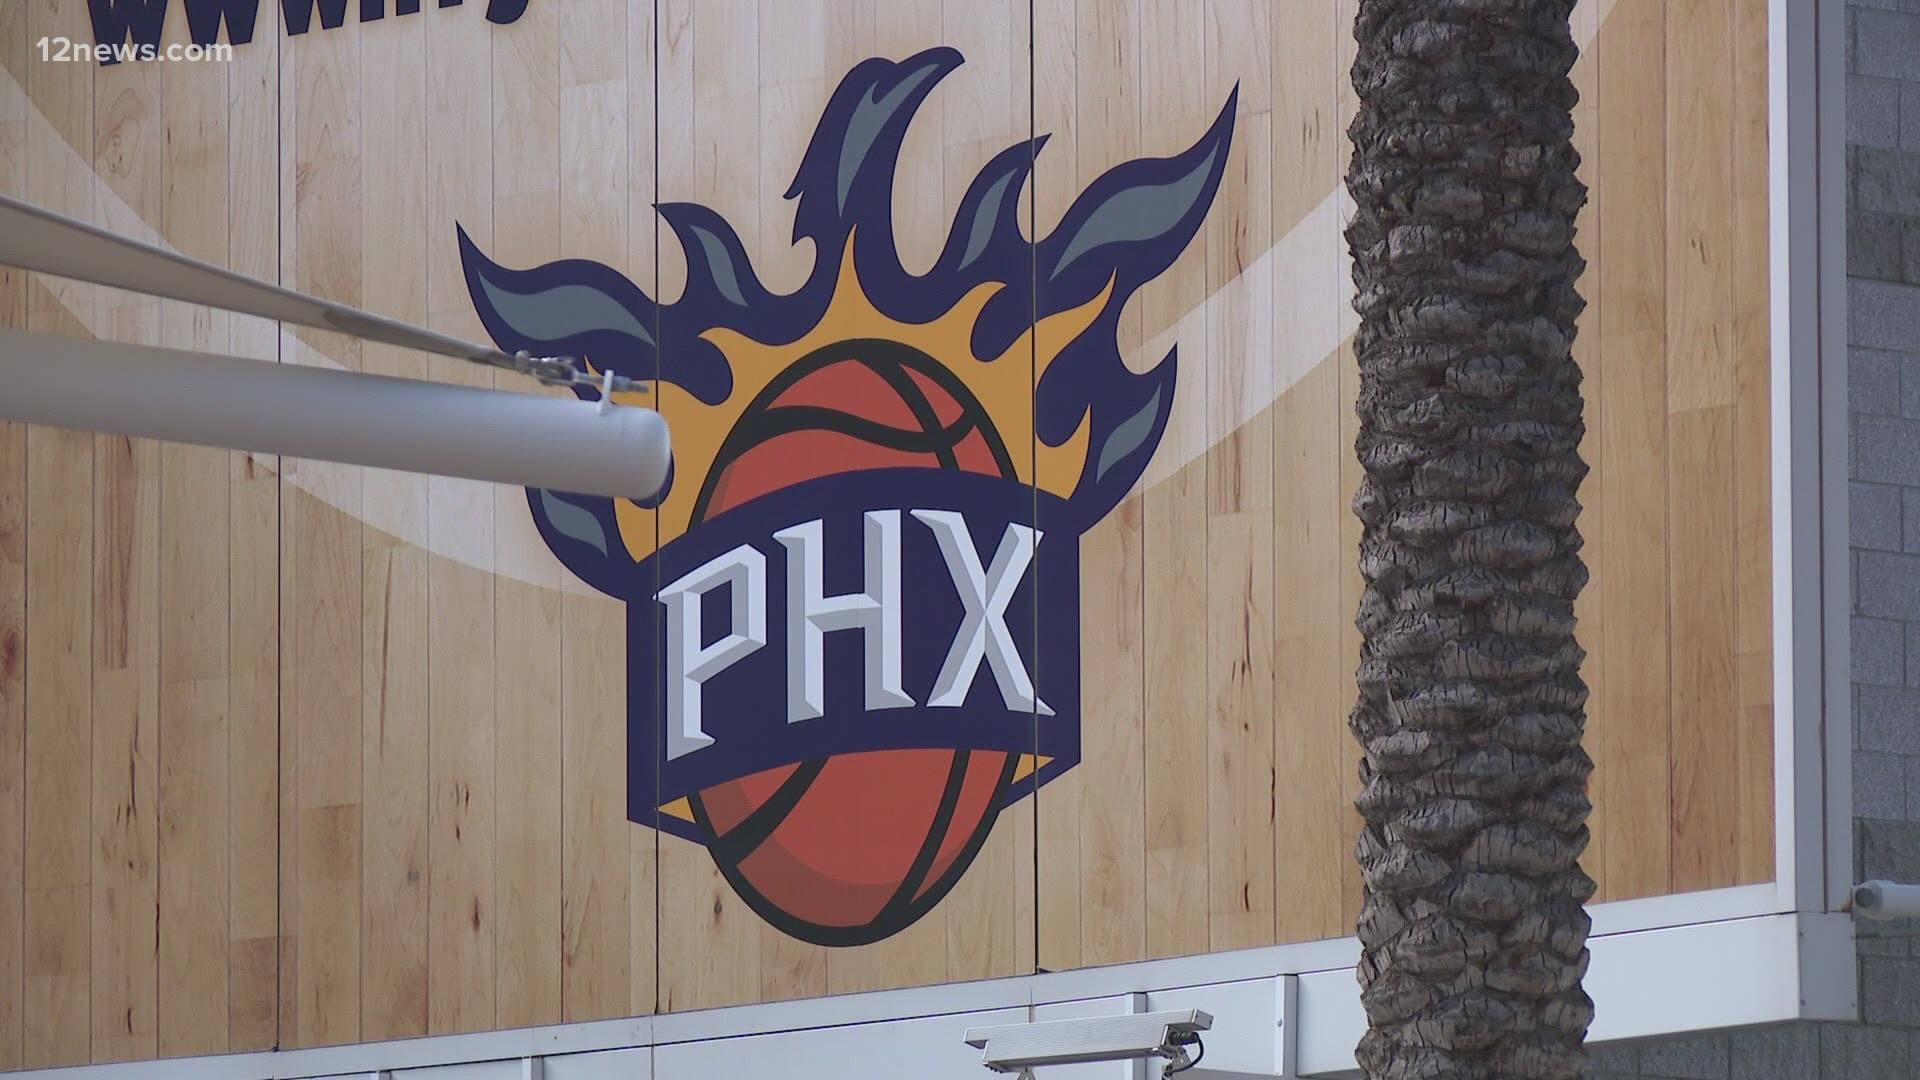 Phoenix police are investigating an alleged hate crime at a Phoenix Suns game. The Asian-American victim says while watching a game someone yelled a racial slur.